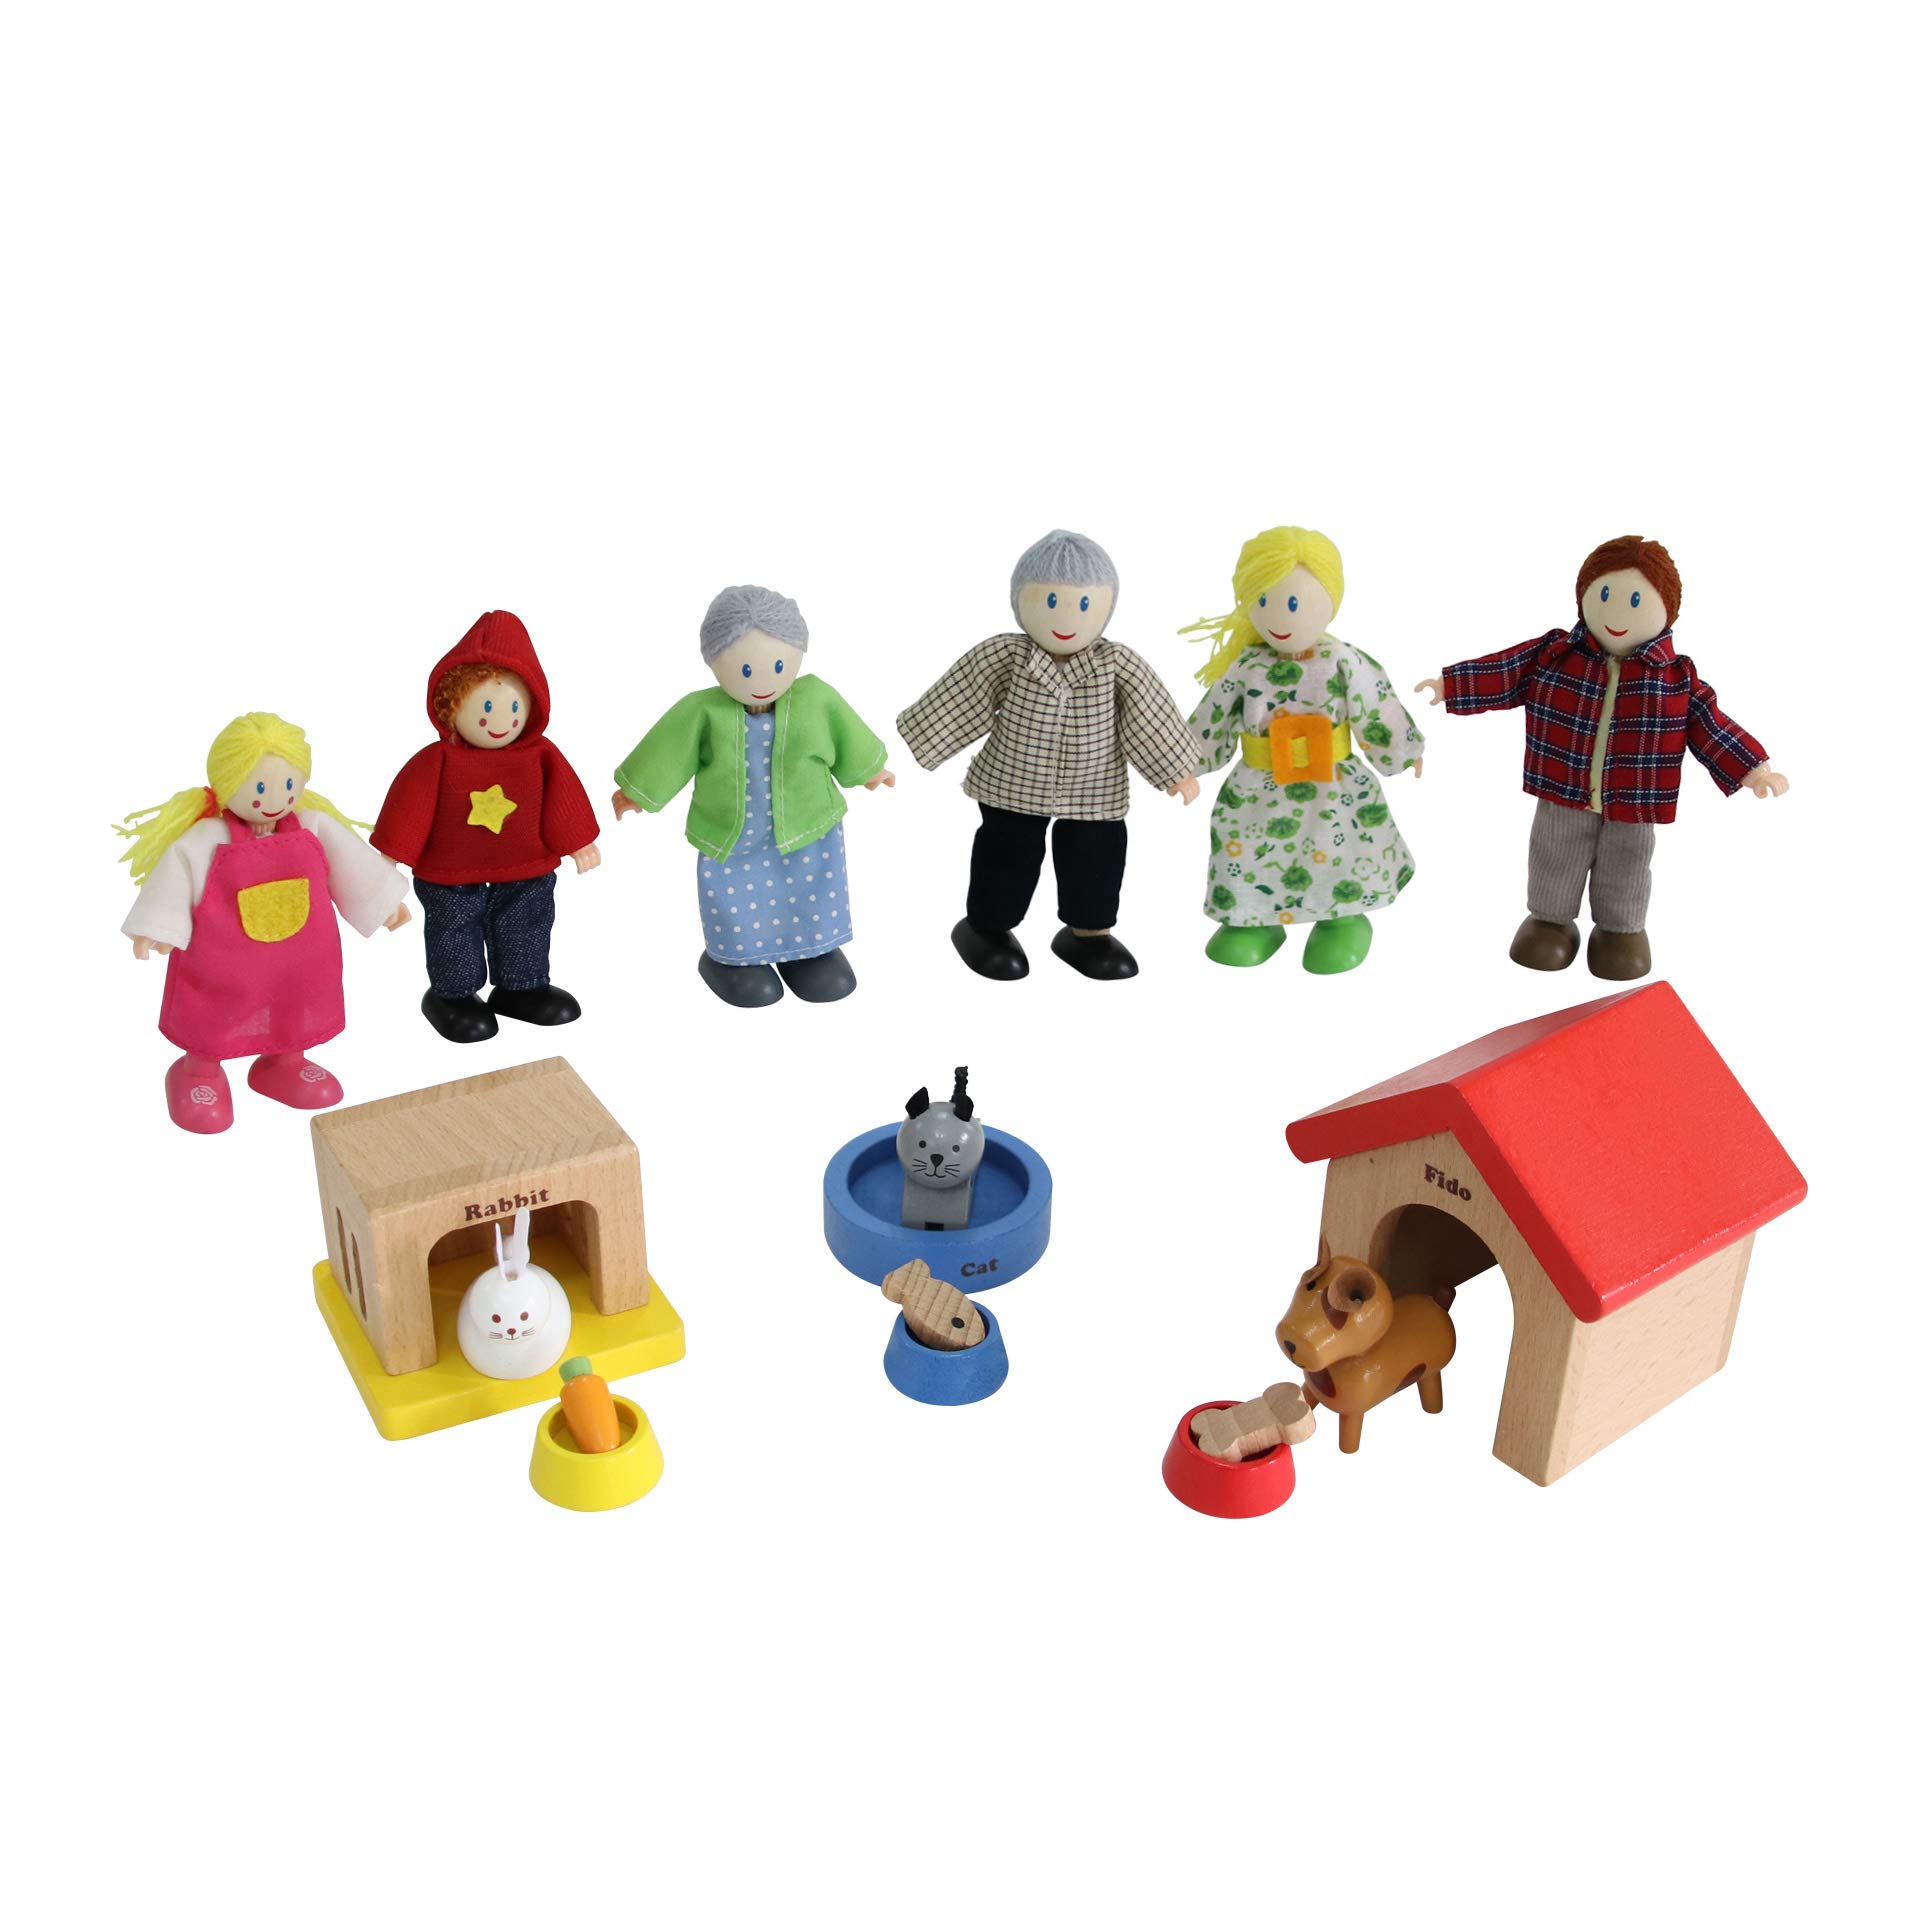 Hape Happy Family Dollhouse with Pet Set Award Winning Doll Set, Unique Accessory for Kid’s Wooden House, Imaginative Play Toy, 6 Family Figures, Adults 4.3